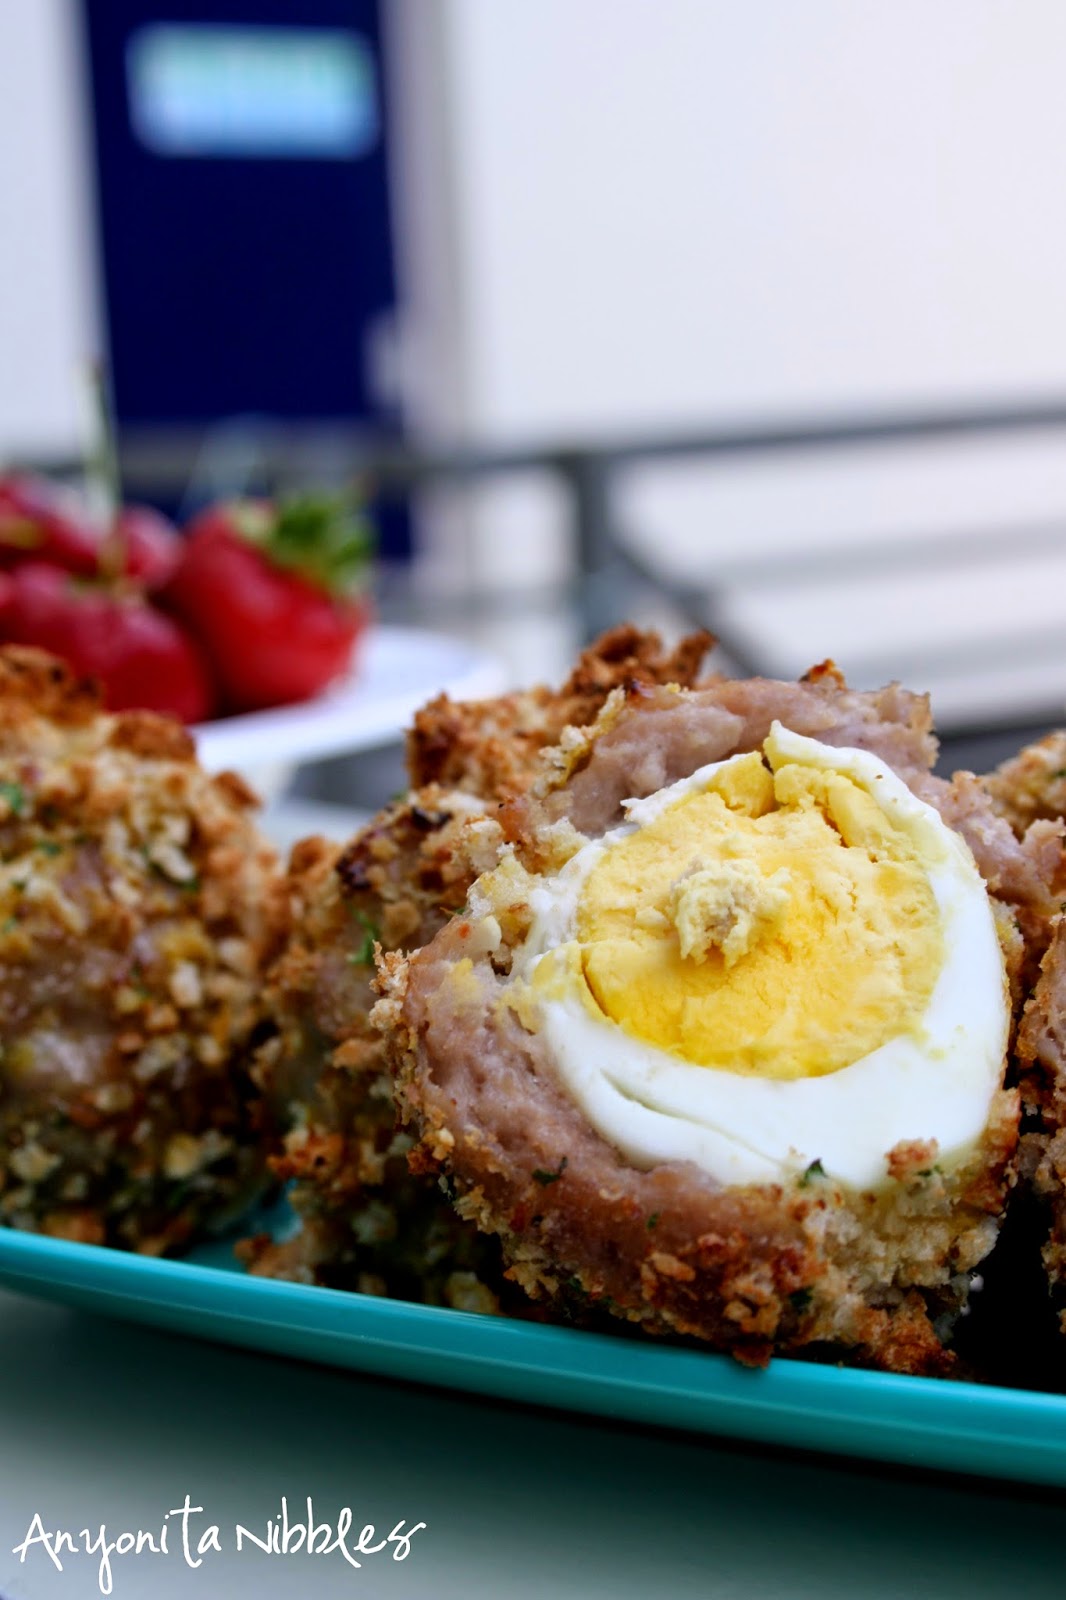 Recipes Using Lots Of Eggs Uk / Baked Ham & Egg Cups. | thefoodsnobuk : Egg yolks have a lower ...